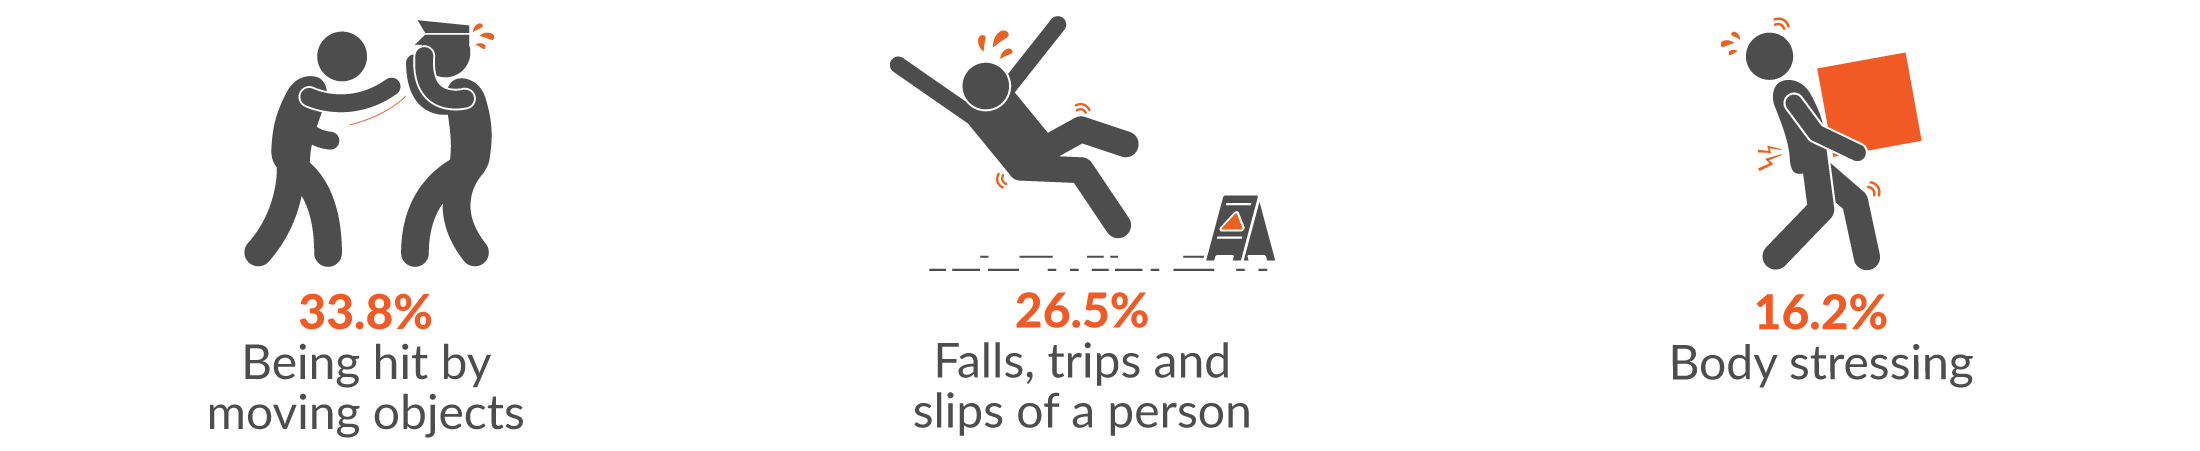 This infographic shows the main three mechanisms of serious injury for Government administration & defence claims were 33.8% being hit by moving object; 26.5% falls, trips and slips of a person; and 16.2% body stressing.